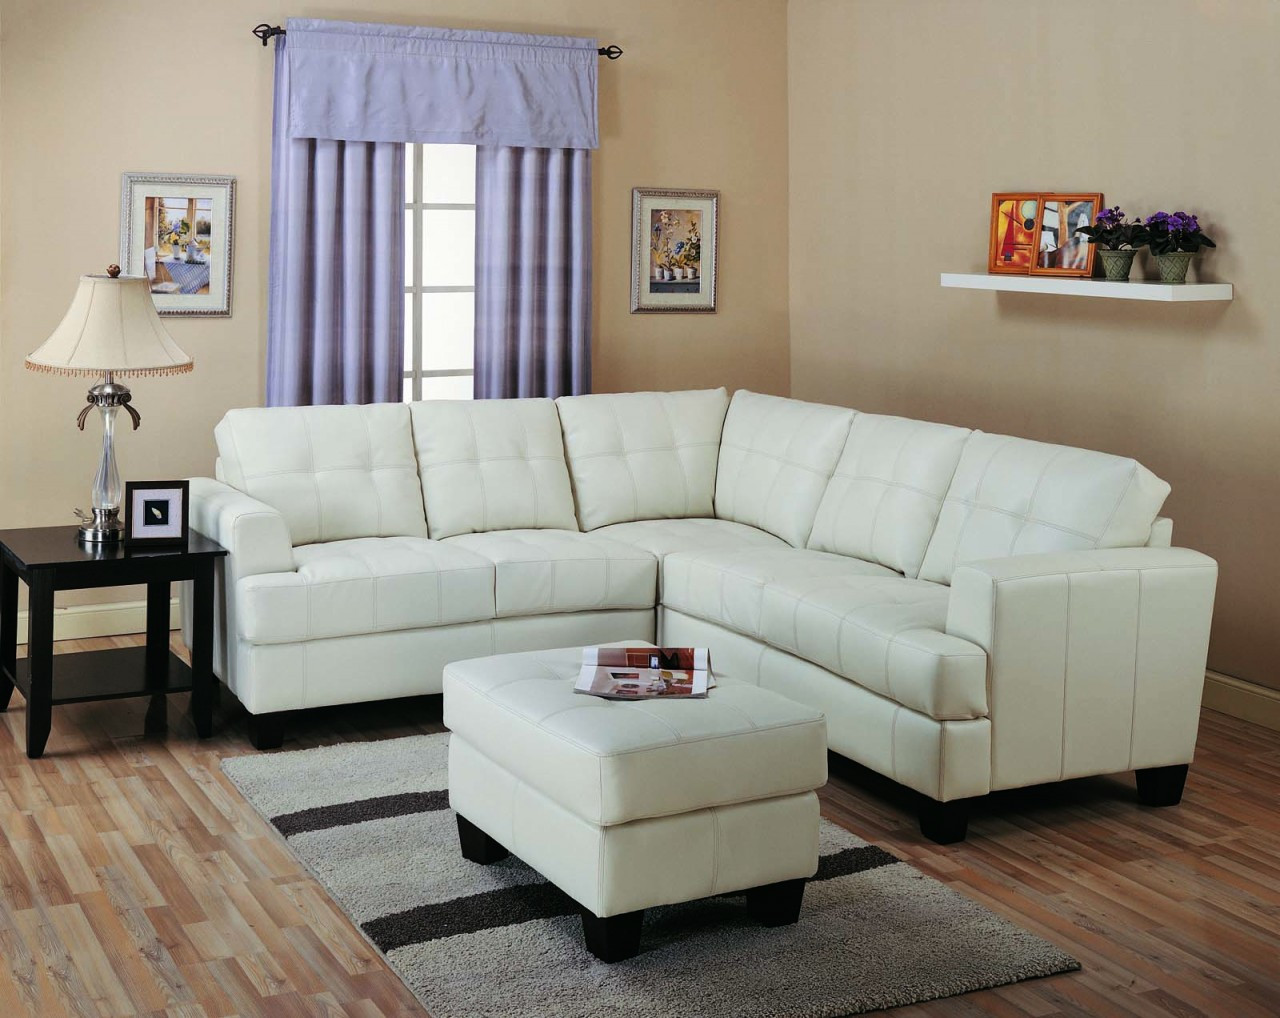 Sofa For Small Living Room
 Types of Best Small Sectional Couches for Small Living